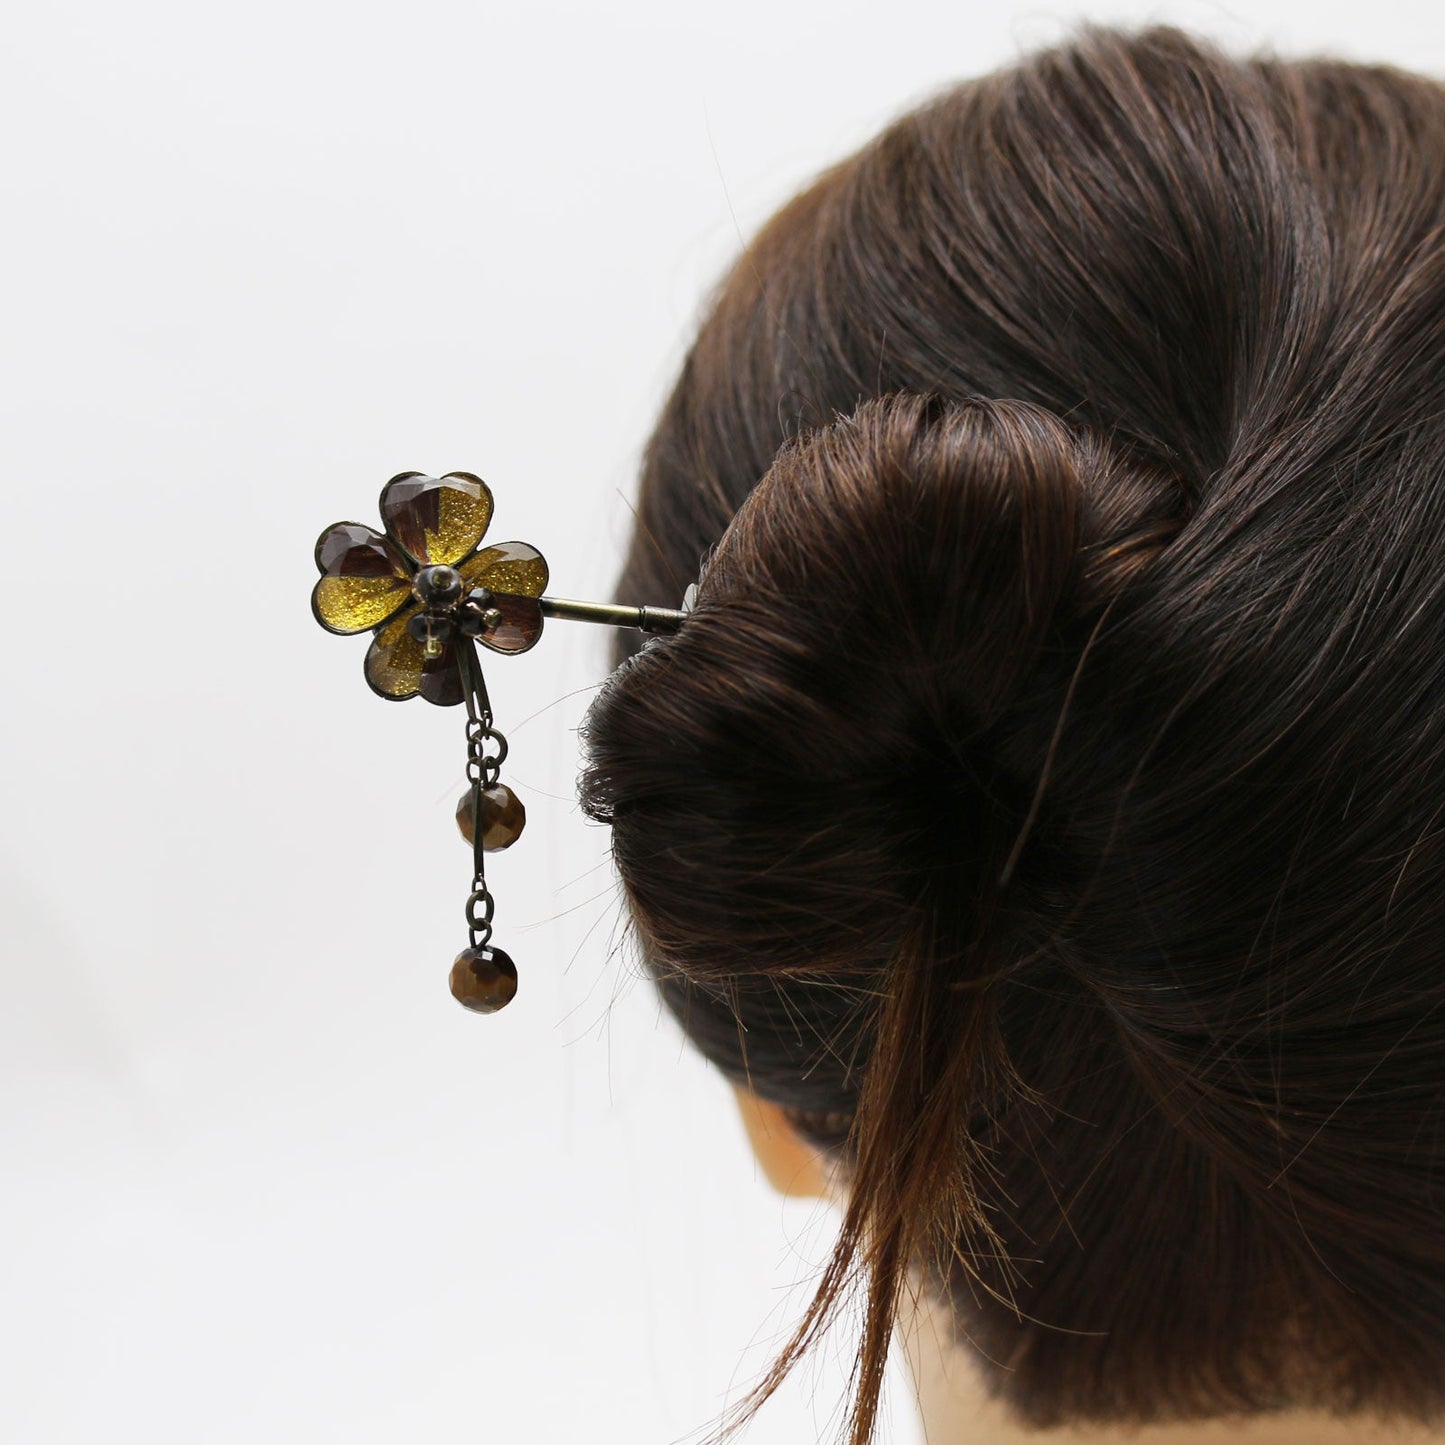 Changeable Ornament Hairpin 4-Leaf Clover Yellow TAMARUSAN